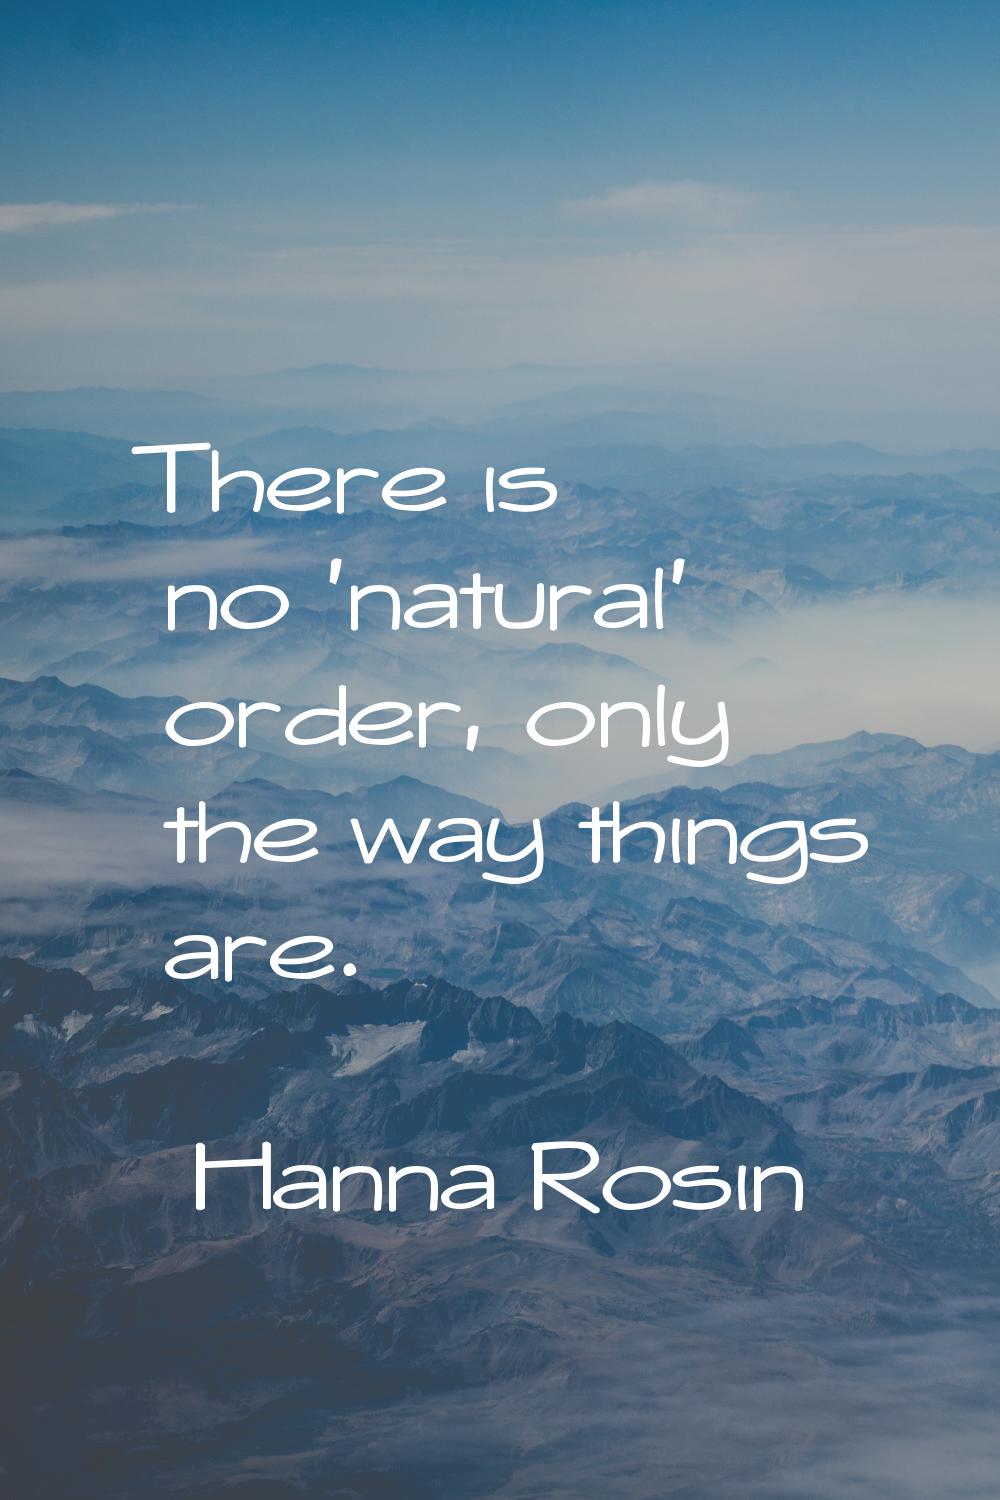 There is no 'natural' order, only the way things are.